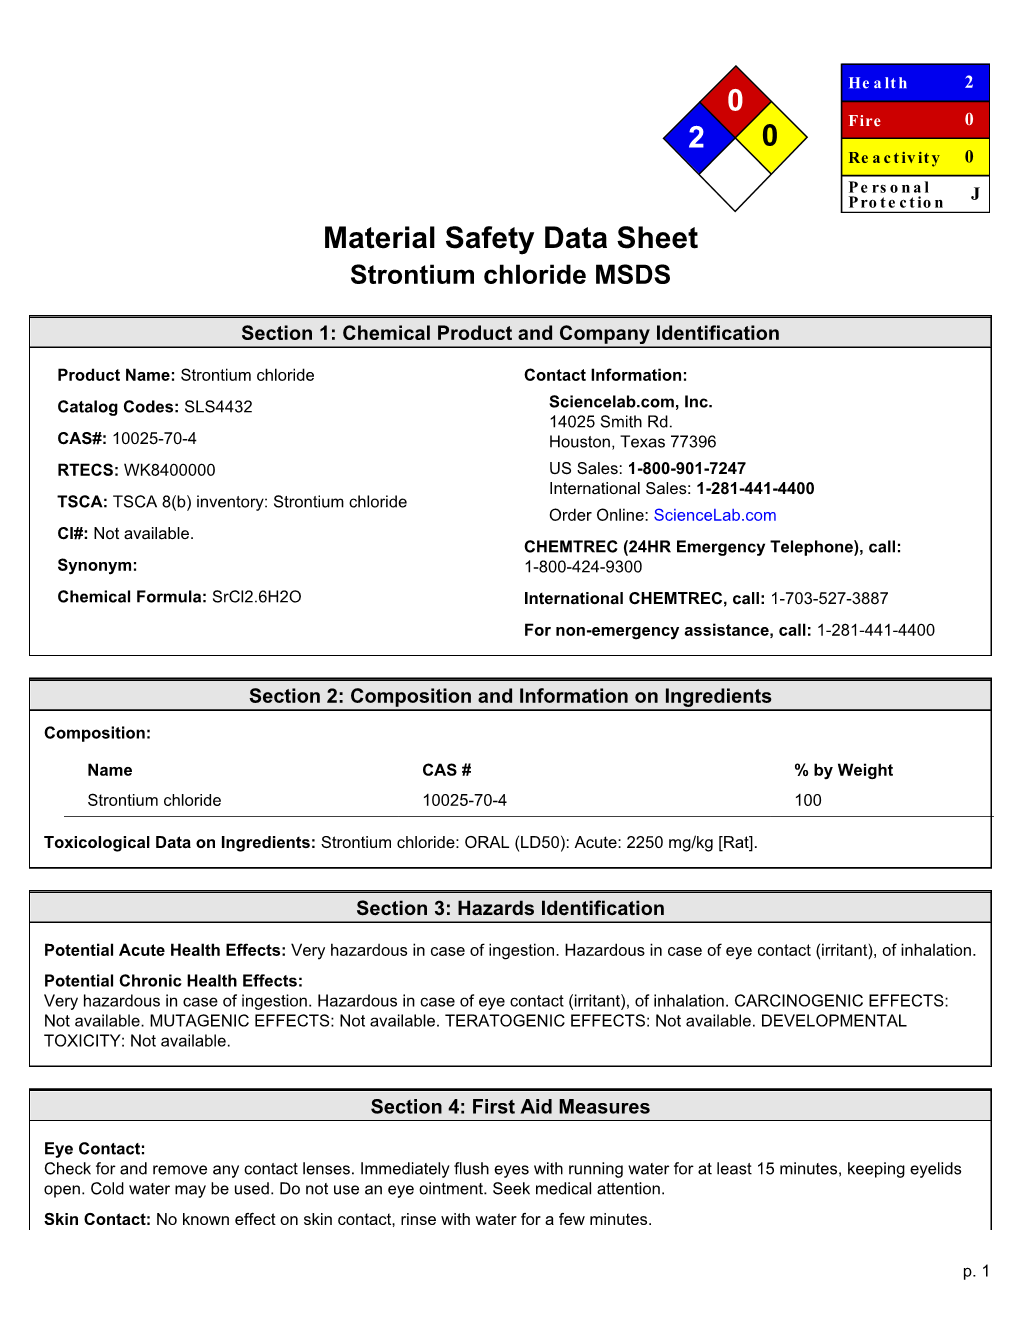 Material Safety Data Sheet Strontium Chloride MSDS